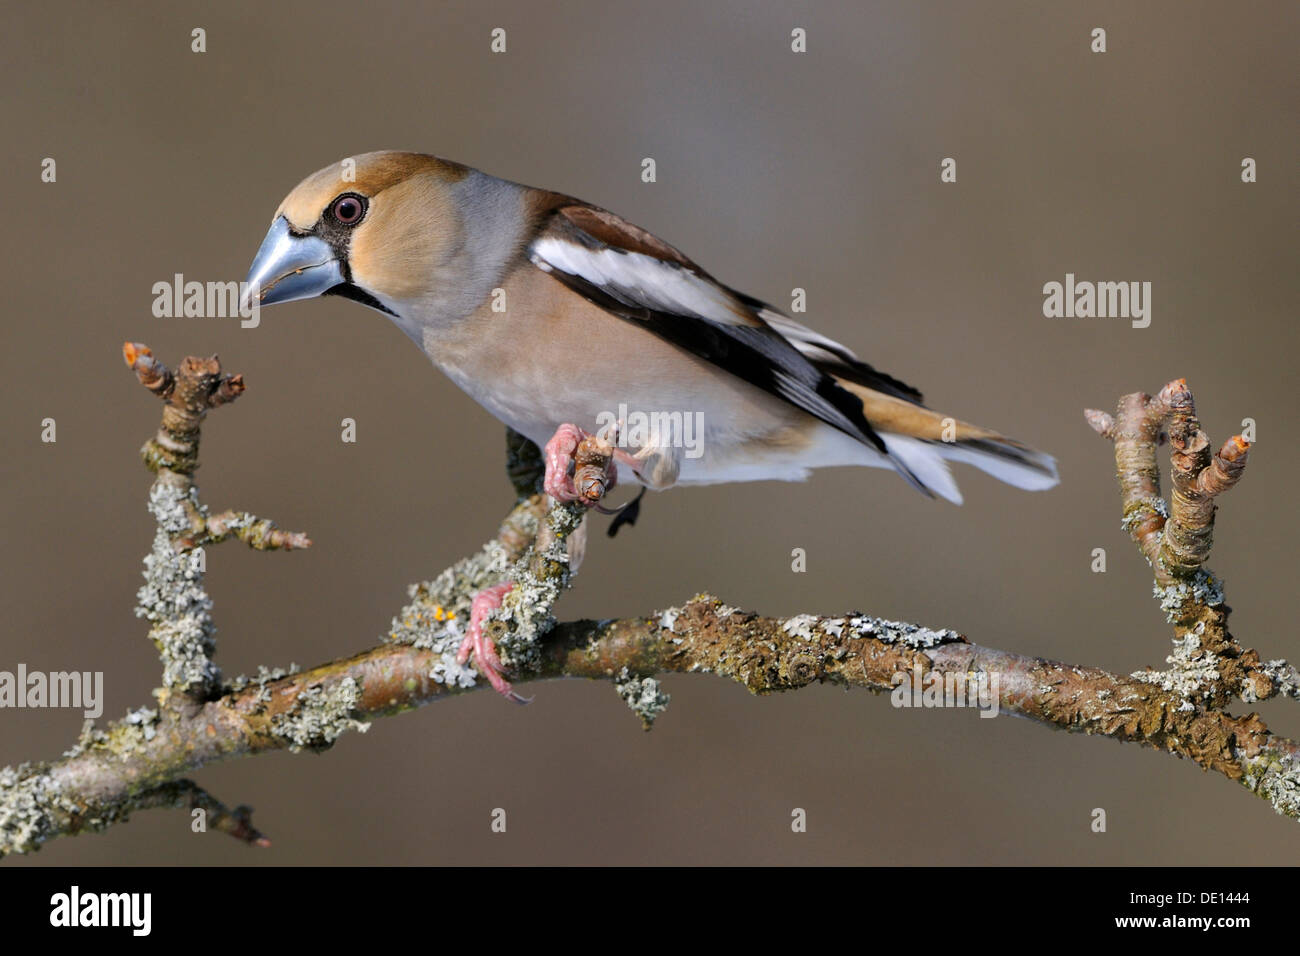 Hawfinch (Coccothraustes coccothraustes), female in breeding plumage, perched on apple tree branch, UNESCO Biosphere Reserve Stock Photo